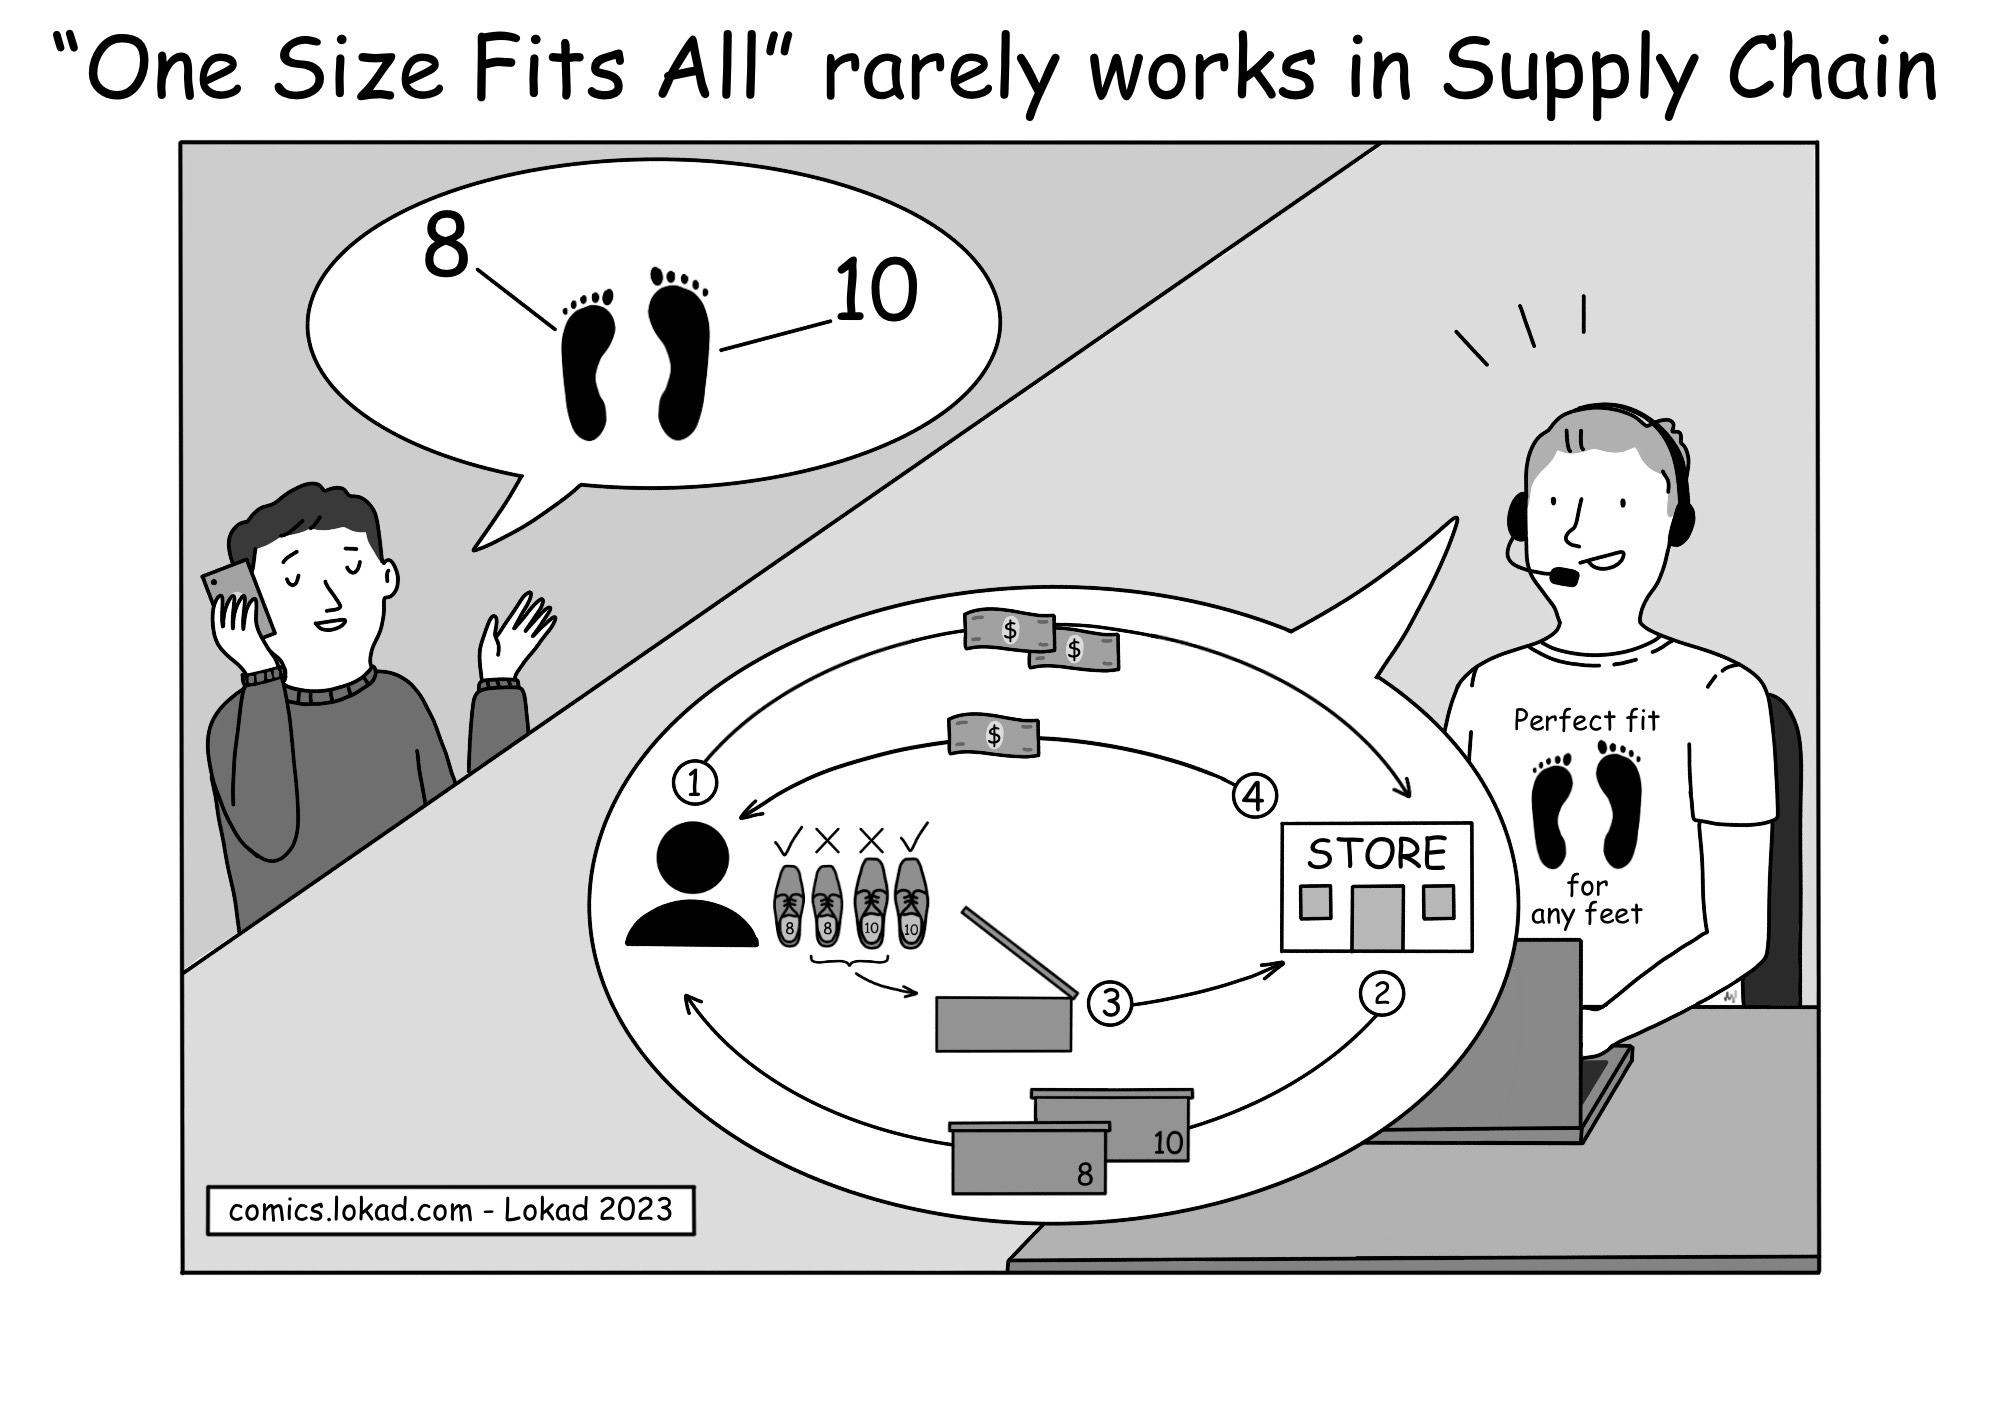 One Size Fits All rarely works in Supply Chains